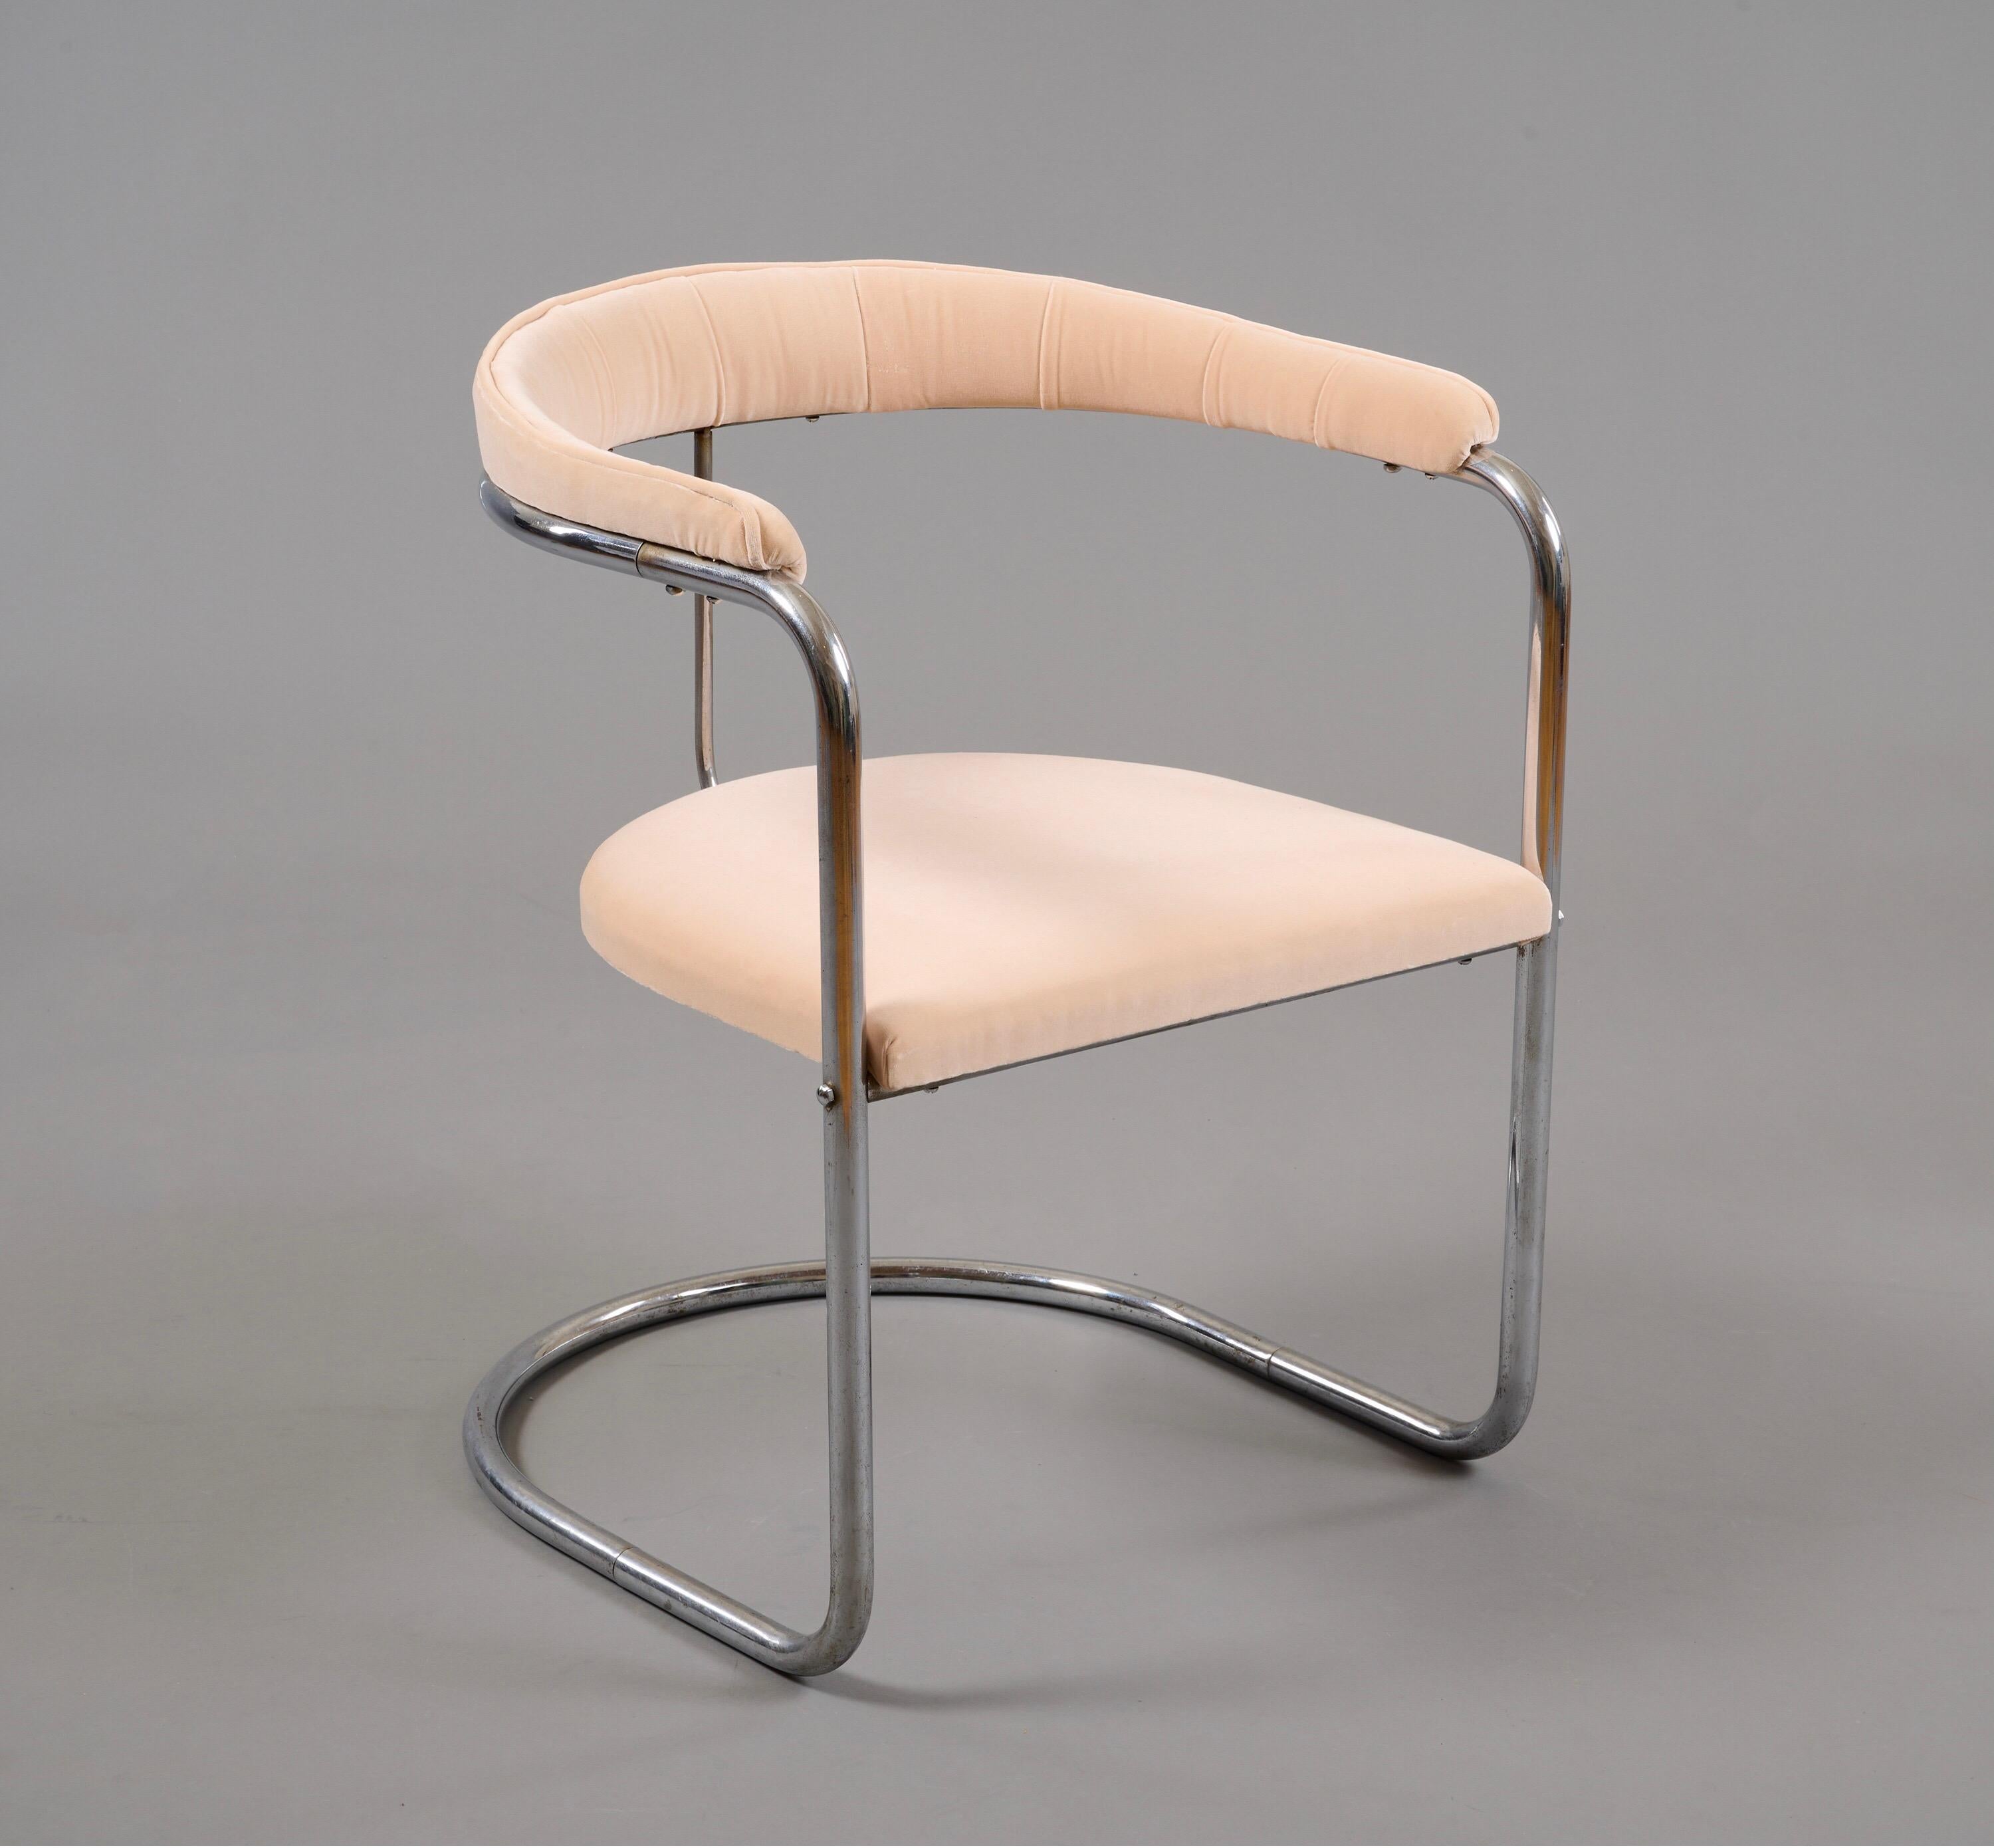 Anton Lorenz (1891–1966)

Timeless, early edition Bauhaus Model SS33 cantilevered armchair by Anton Lorenz for Thonet, circa 1930, in tubular chrome-plated steel. Lorenz, a frequent collaborator of Marcel Breuer's, was a design pioneer and the